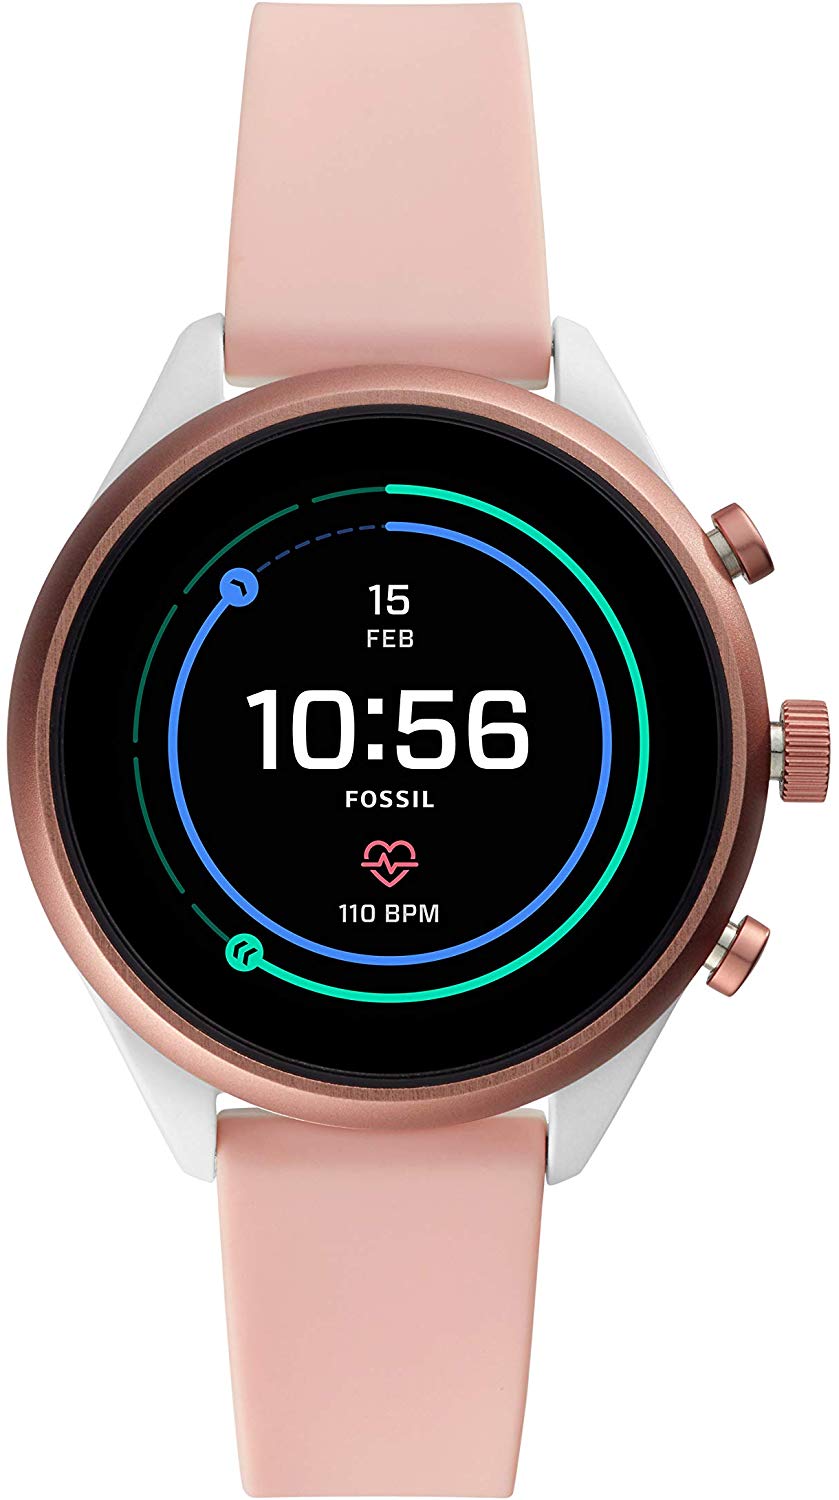 Fossil Women's Sport Metal and Silicone Touchscreen Smartwatch Only $99